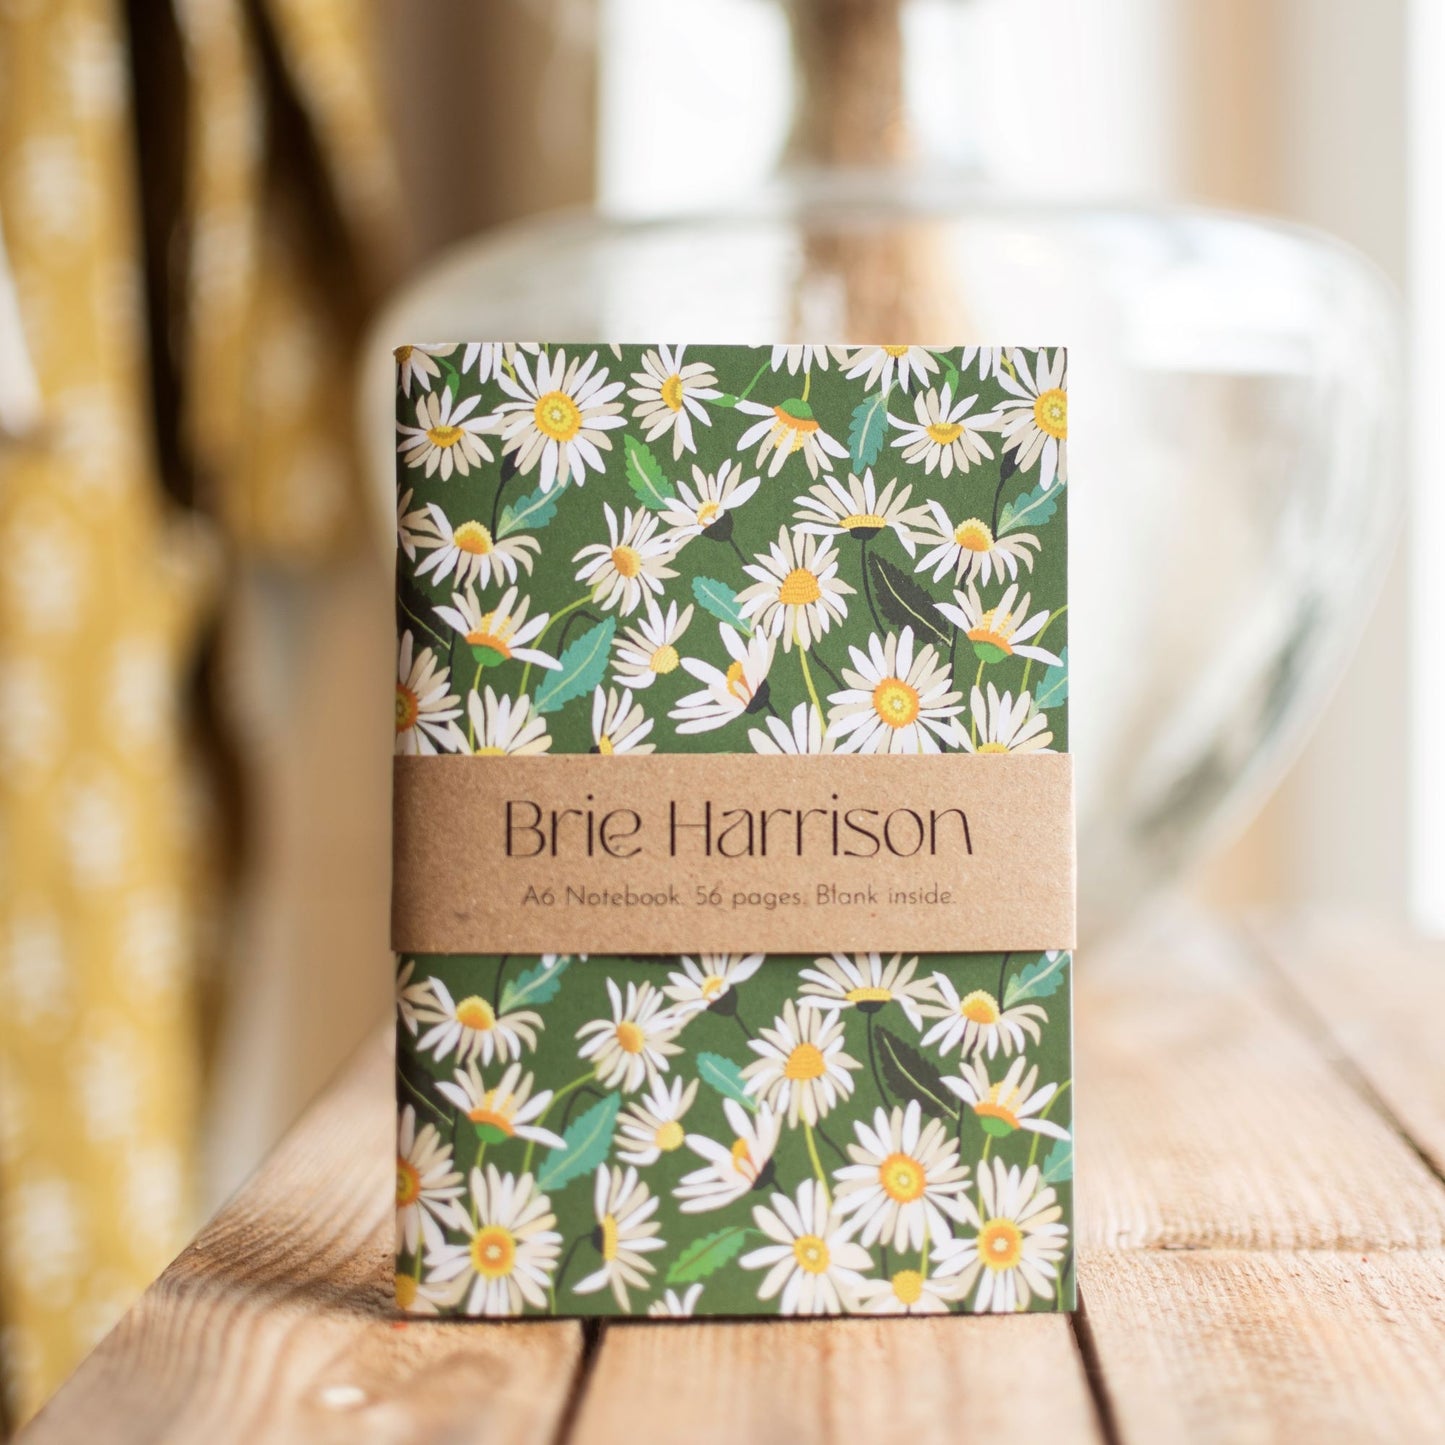 Daisies A6 Notebook by Brie Harrison - The Bristol Artisan Handmade Sustainable Gifts and Homewares.